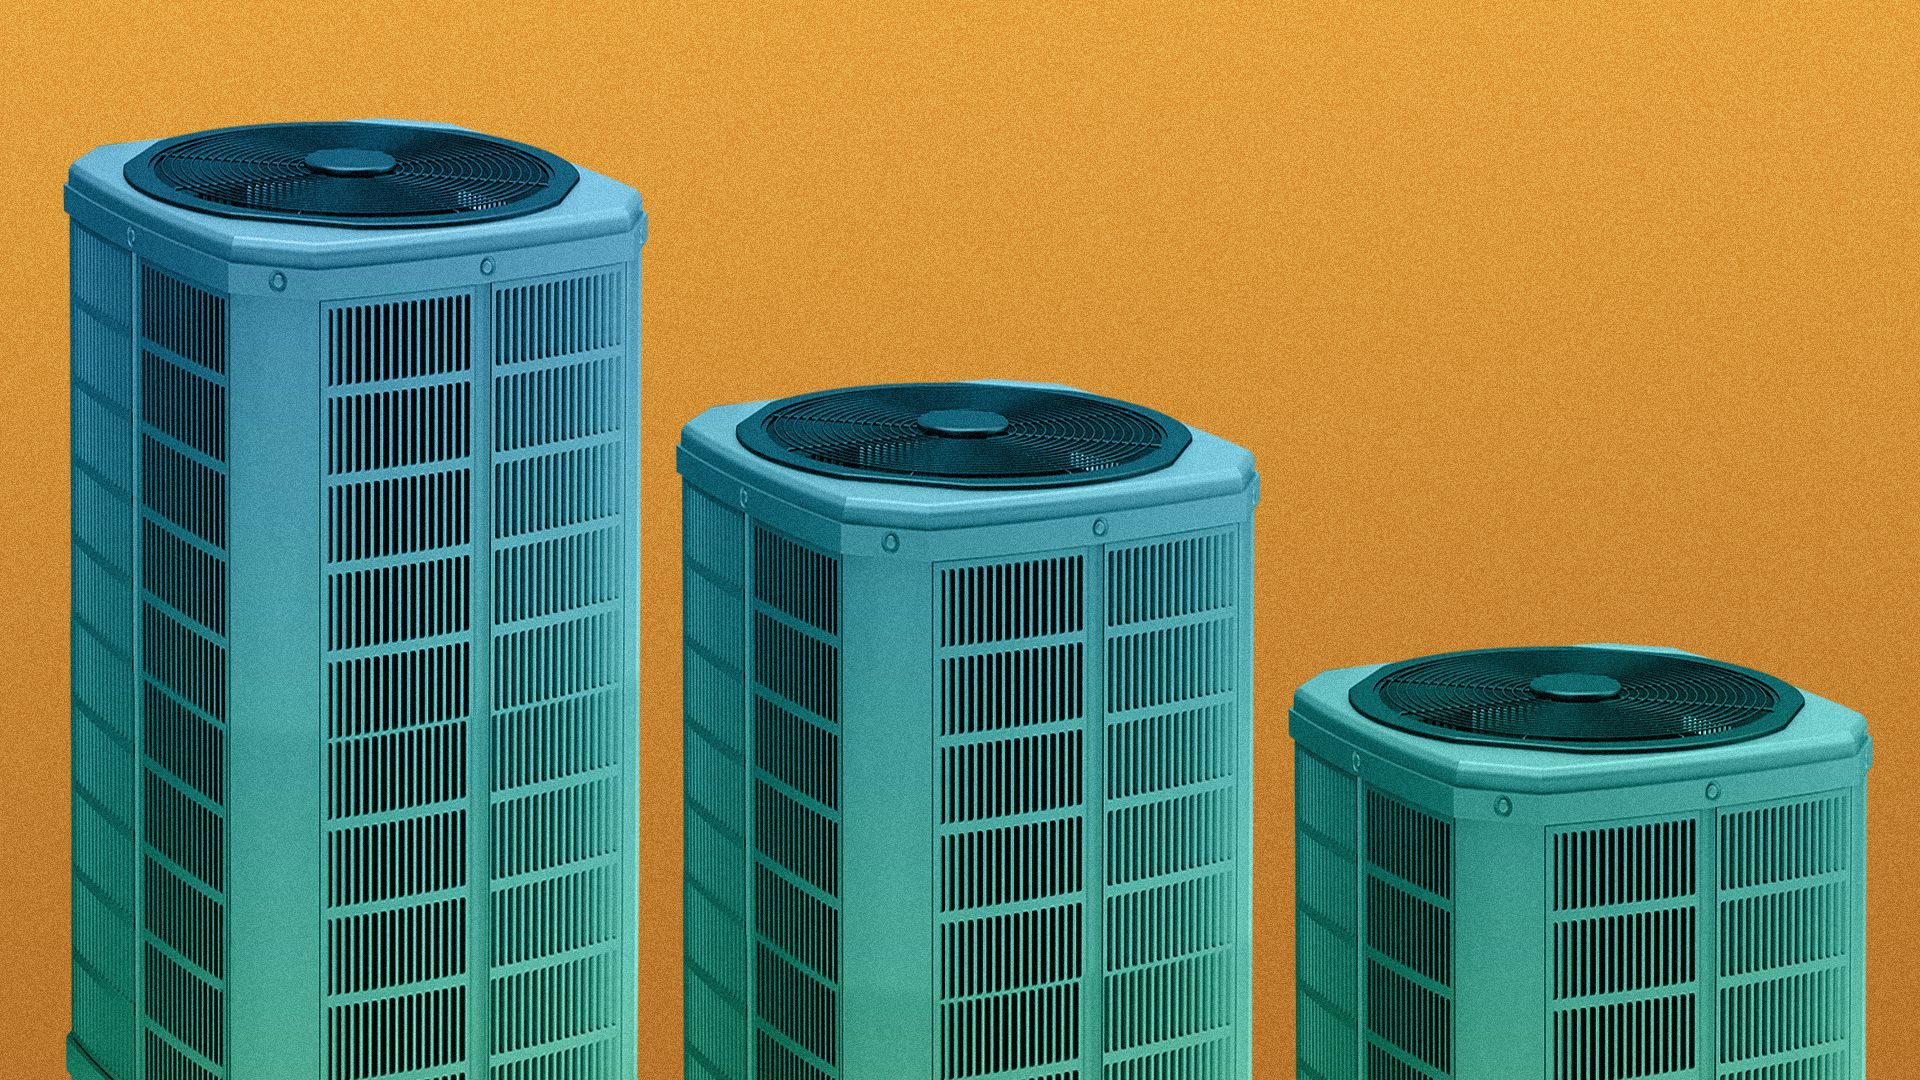 Illustration of a bar chart made of air conditioning units.